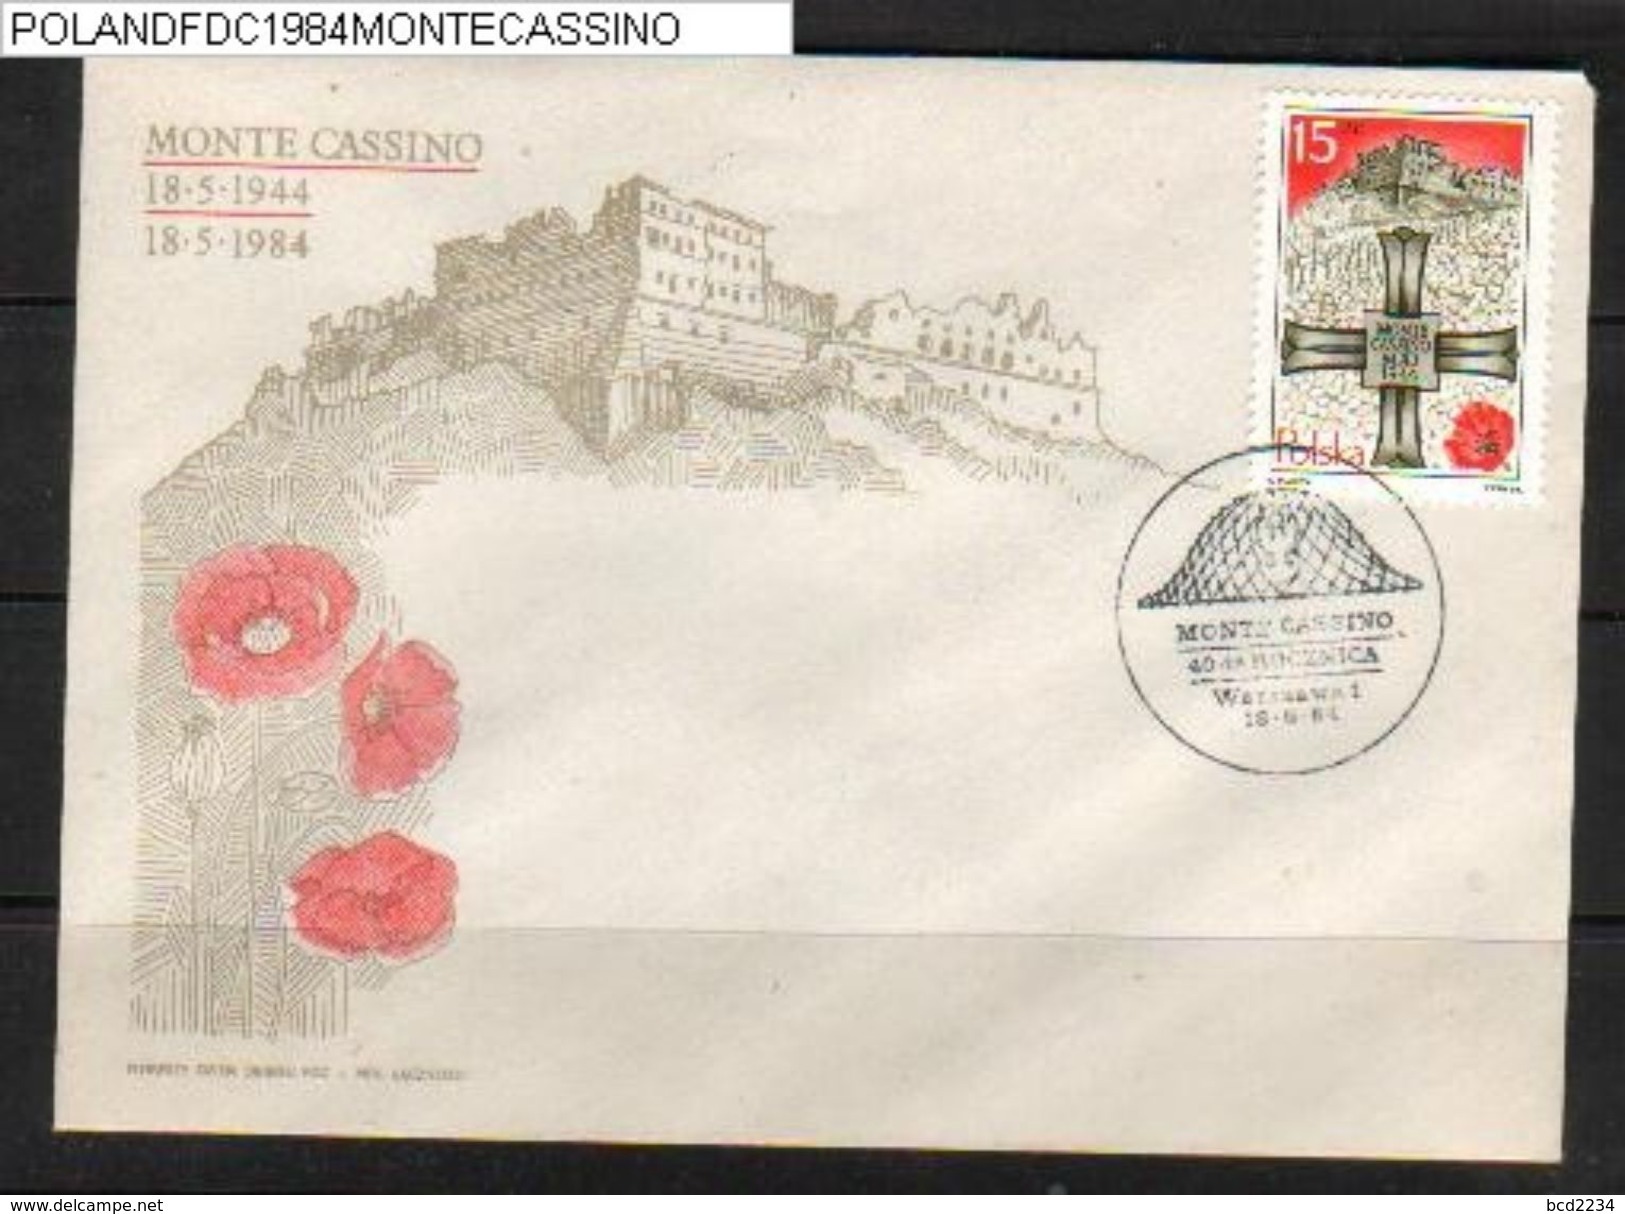 POLAND FDC 1984 40TH ANNIVERSARY OF BATTLE OF MONTE CASSINO ITALY General Anders Army World War II History WW2 - FDC